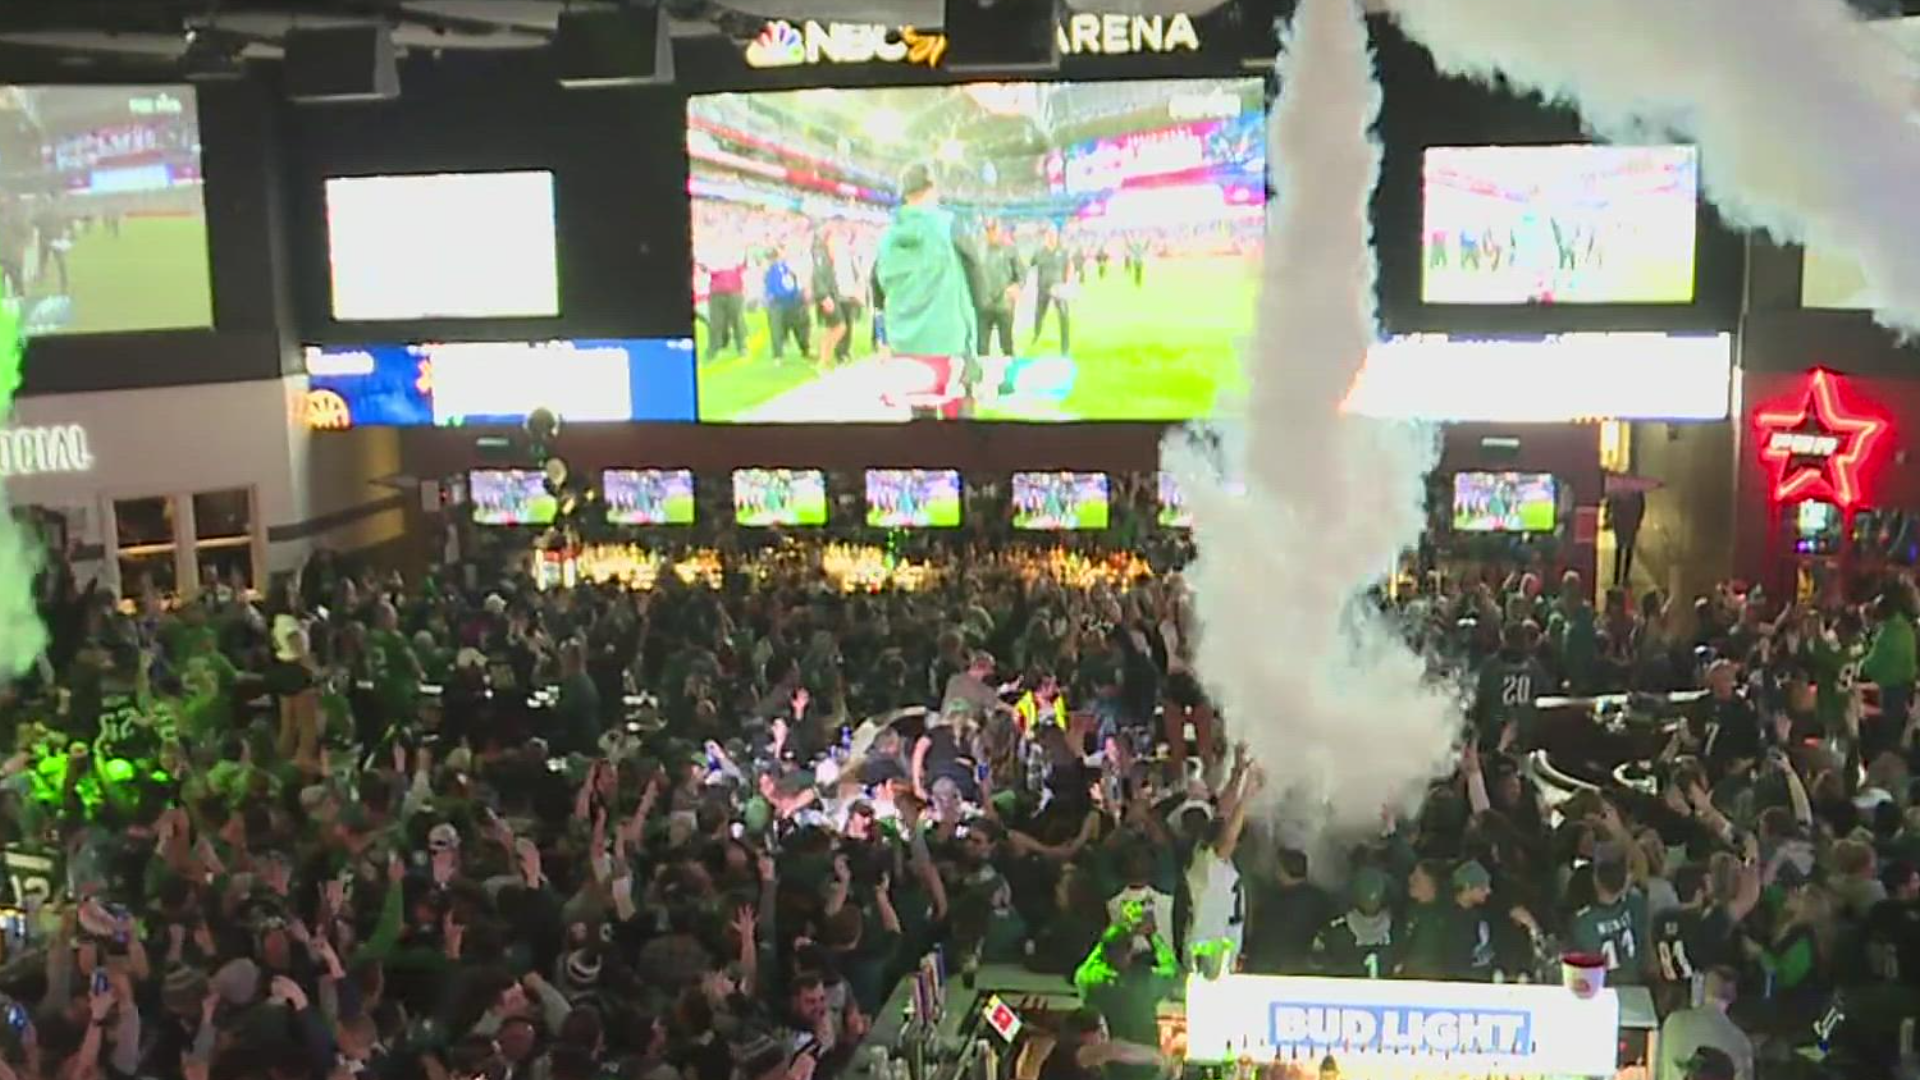 Around 6,000 Eagles fans packed Xfinity Live! to cheer on the Birds in Super Bowl LVII.